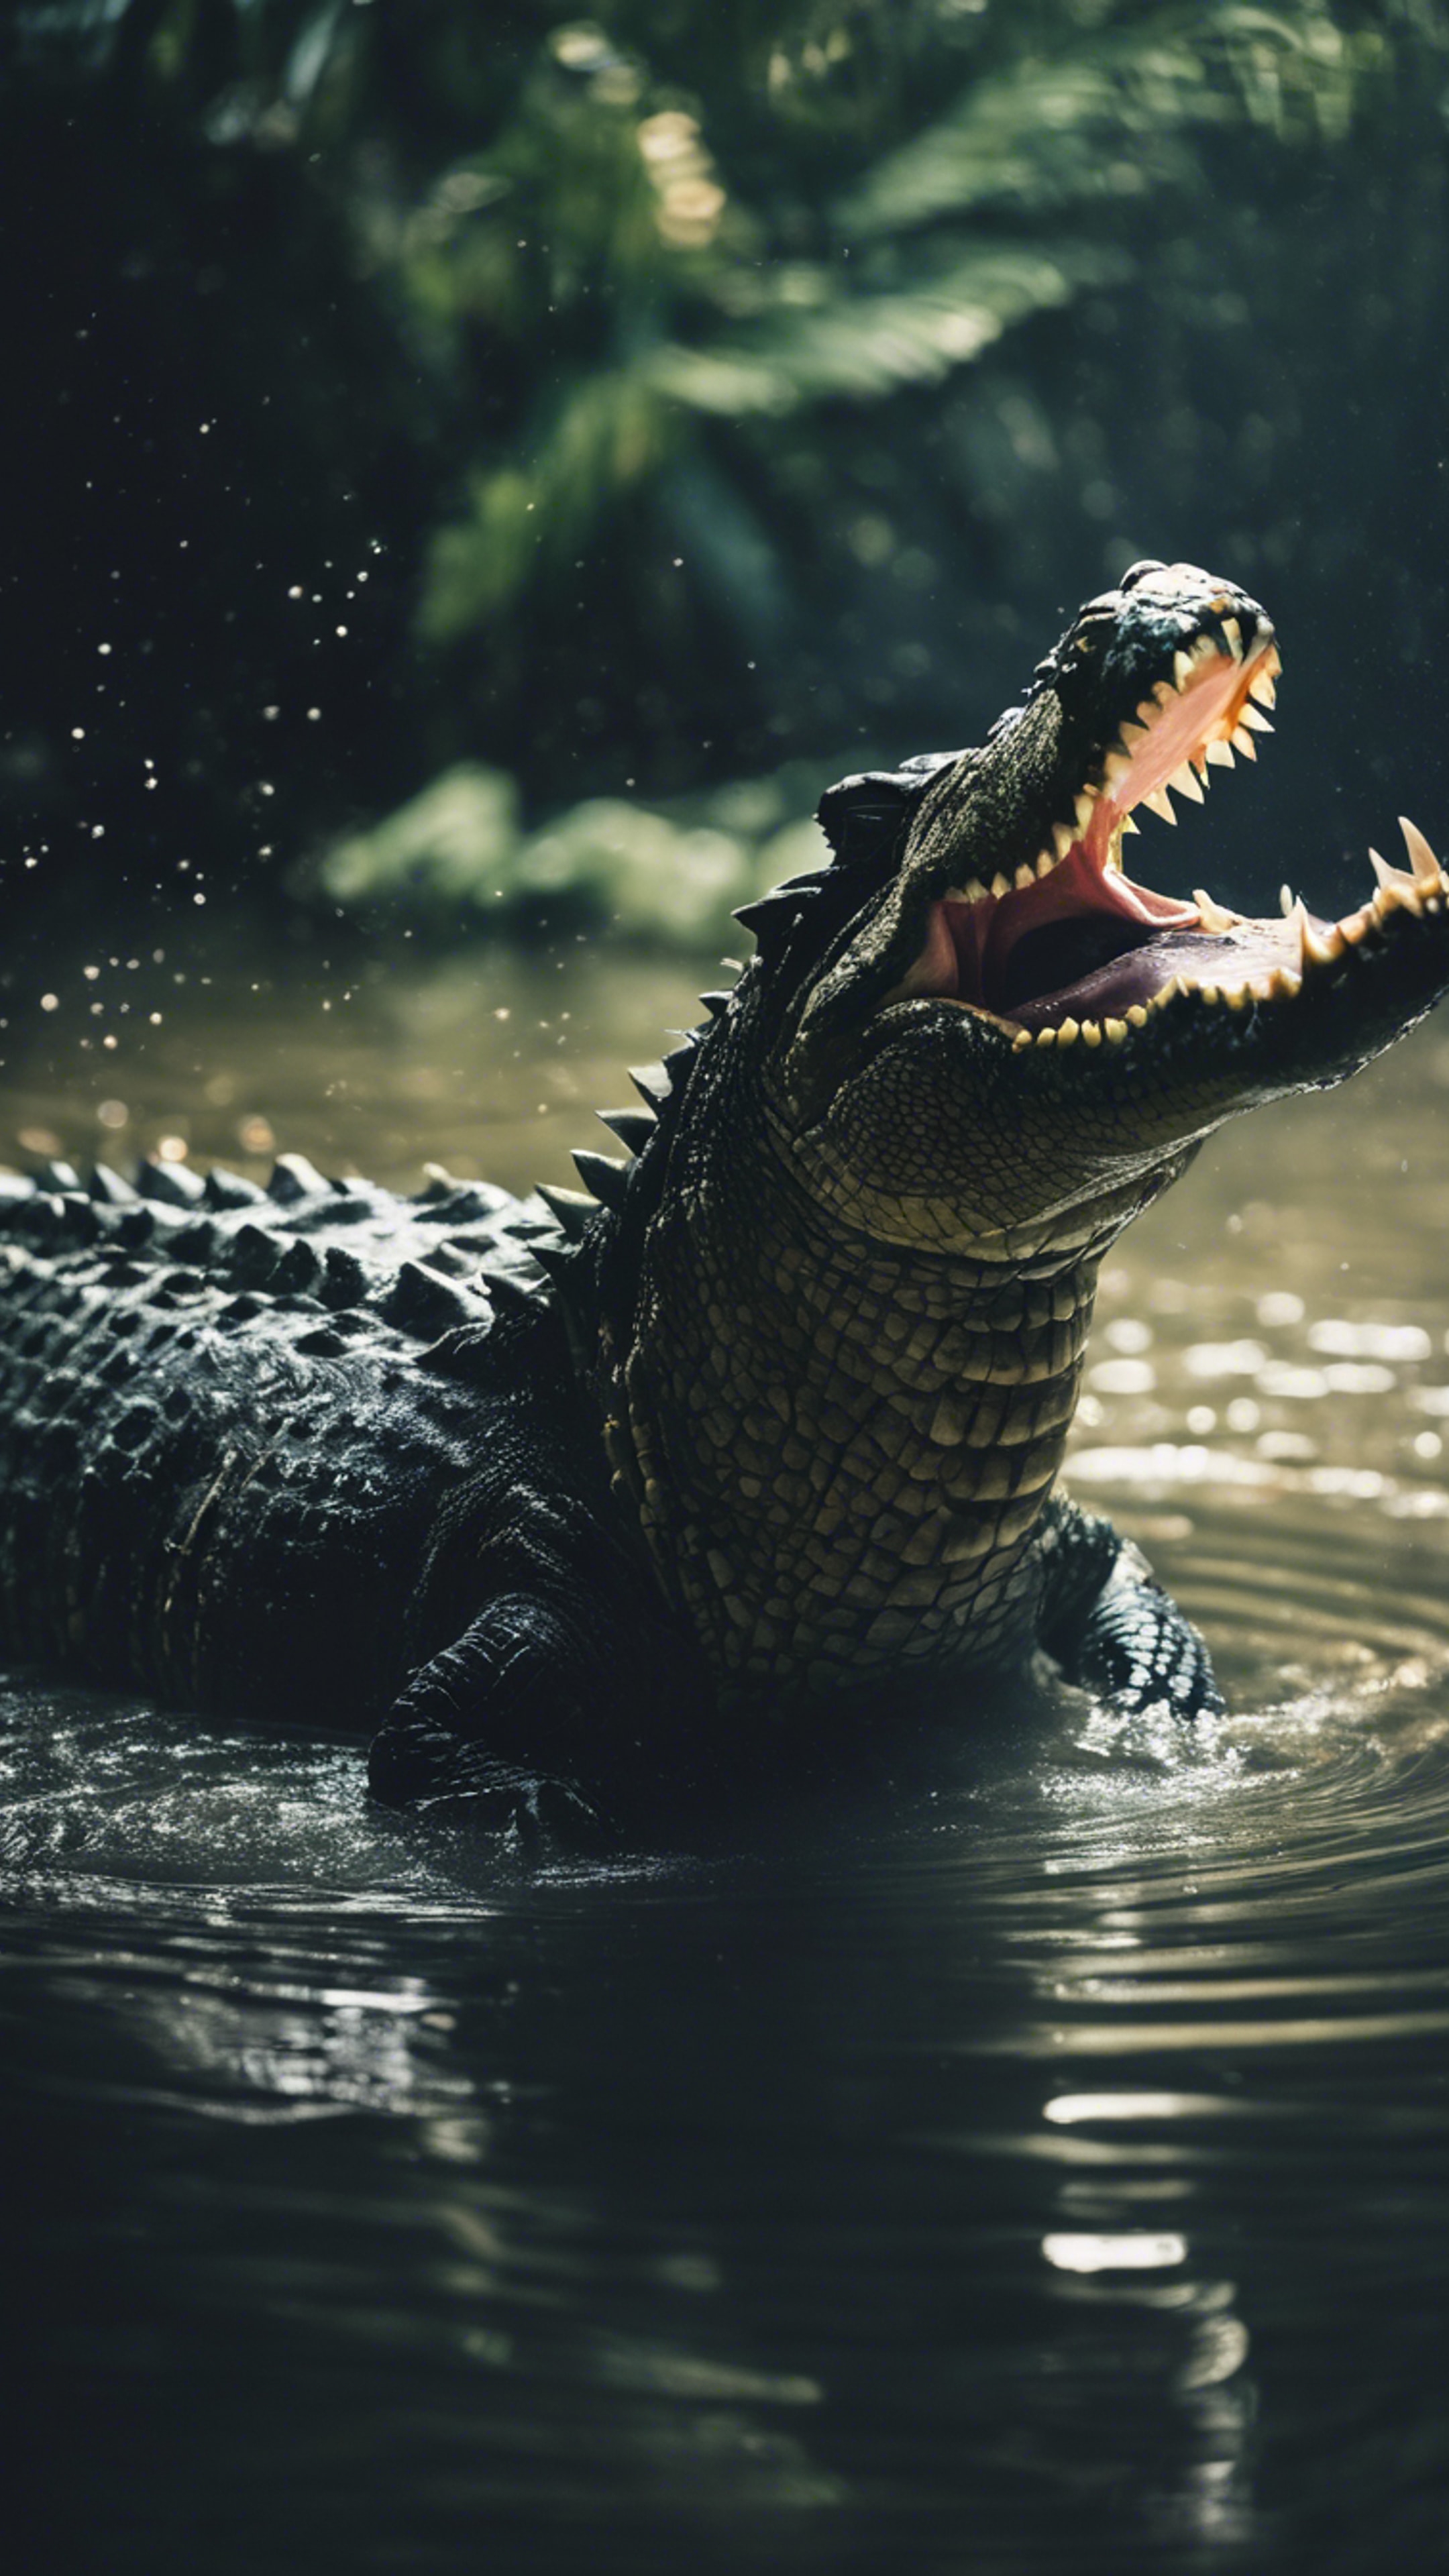 Two crocodiles engaging in a territorial battle in the middle of a dark lagoon. Wallpaper[ccc66b55c2b3408d8928]